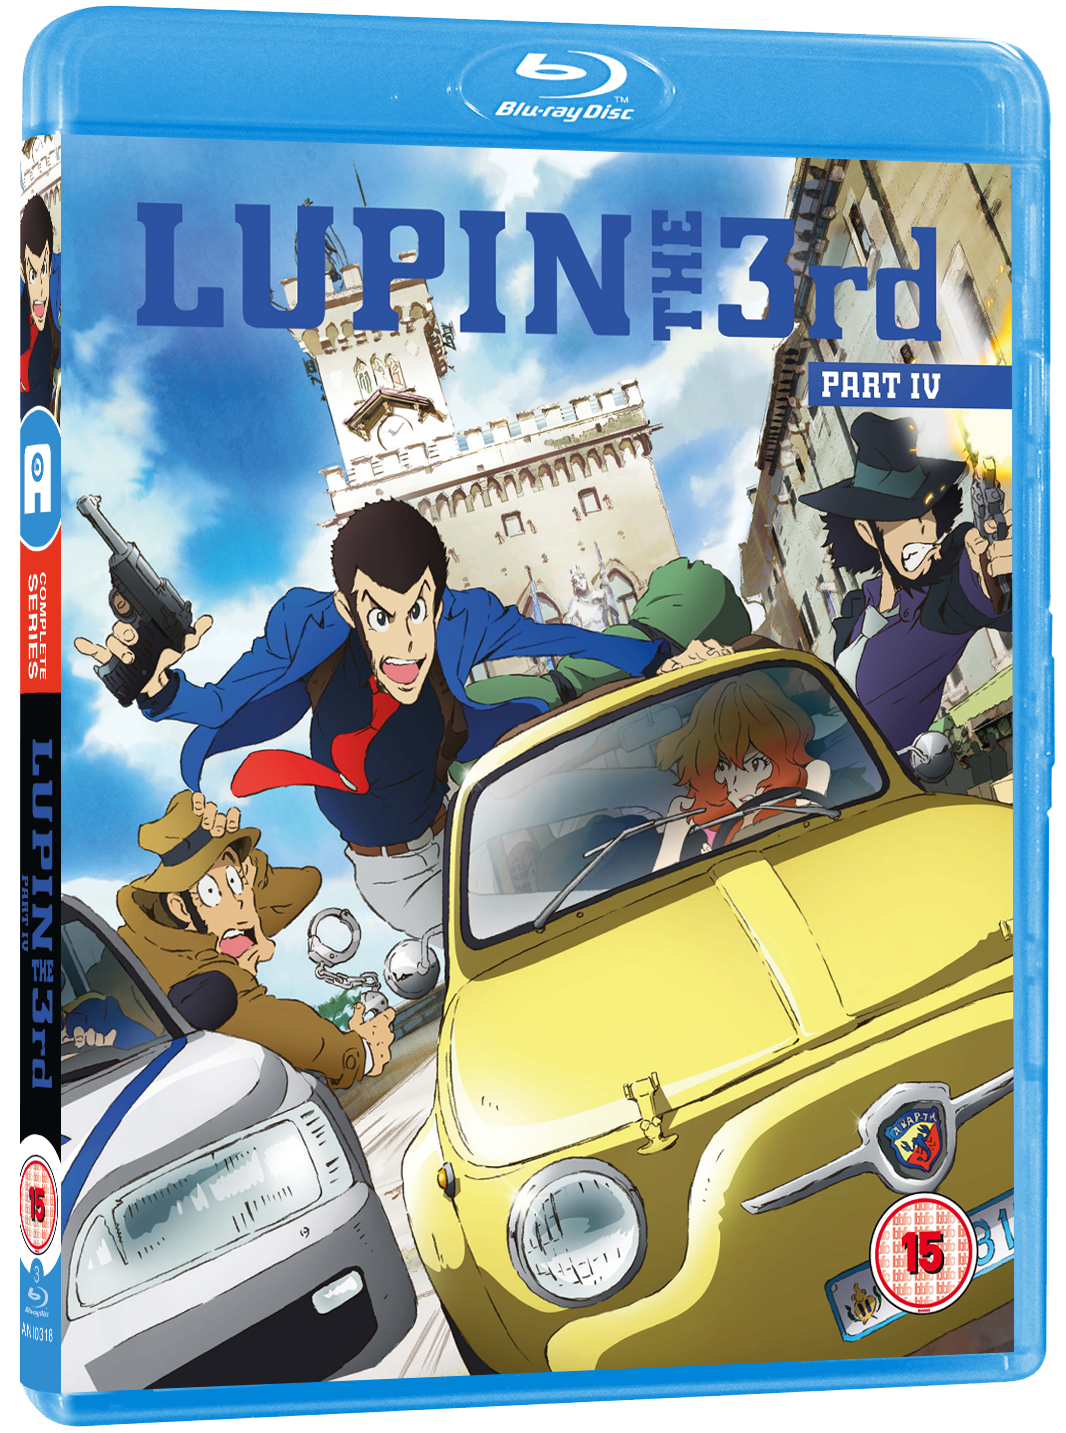 Lupin the 3rd: Part IV – English dub edition update – All the Anime